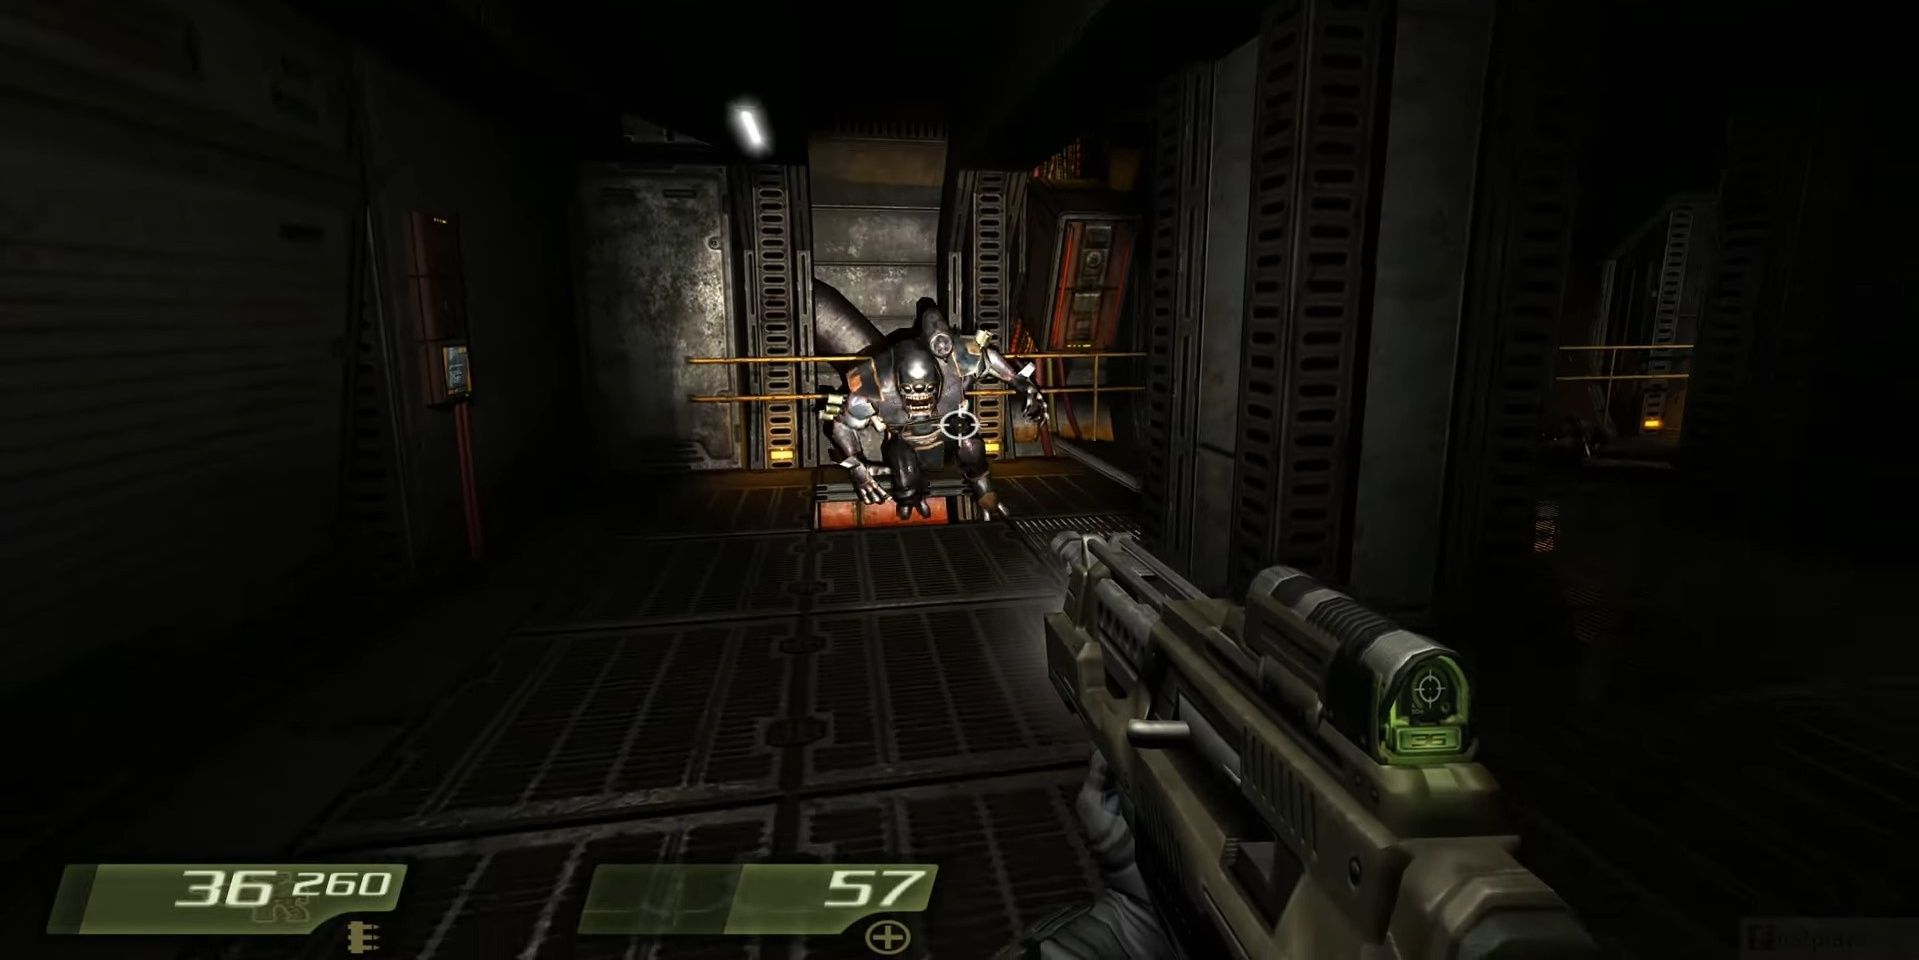 A player is charged by a Strogg enemy in Quake 4